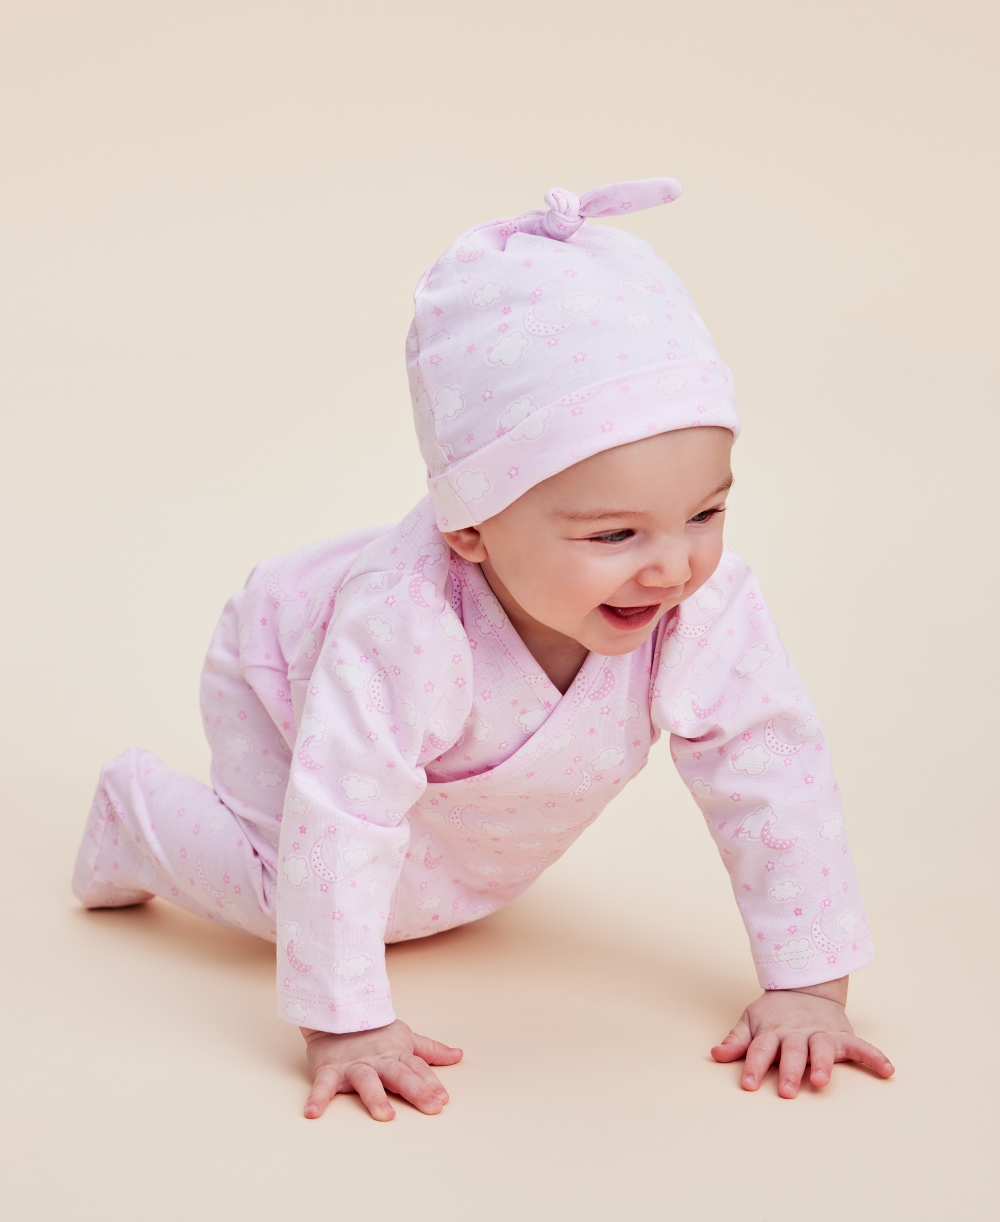 Night Clouds Pink Footed Pant Set - Kissy Kissy